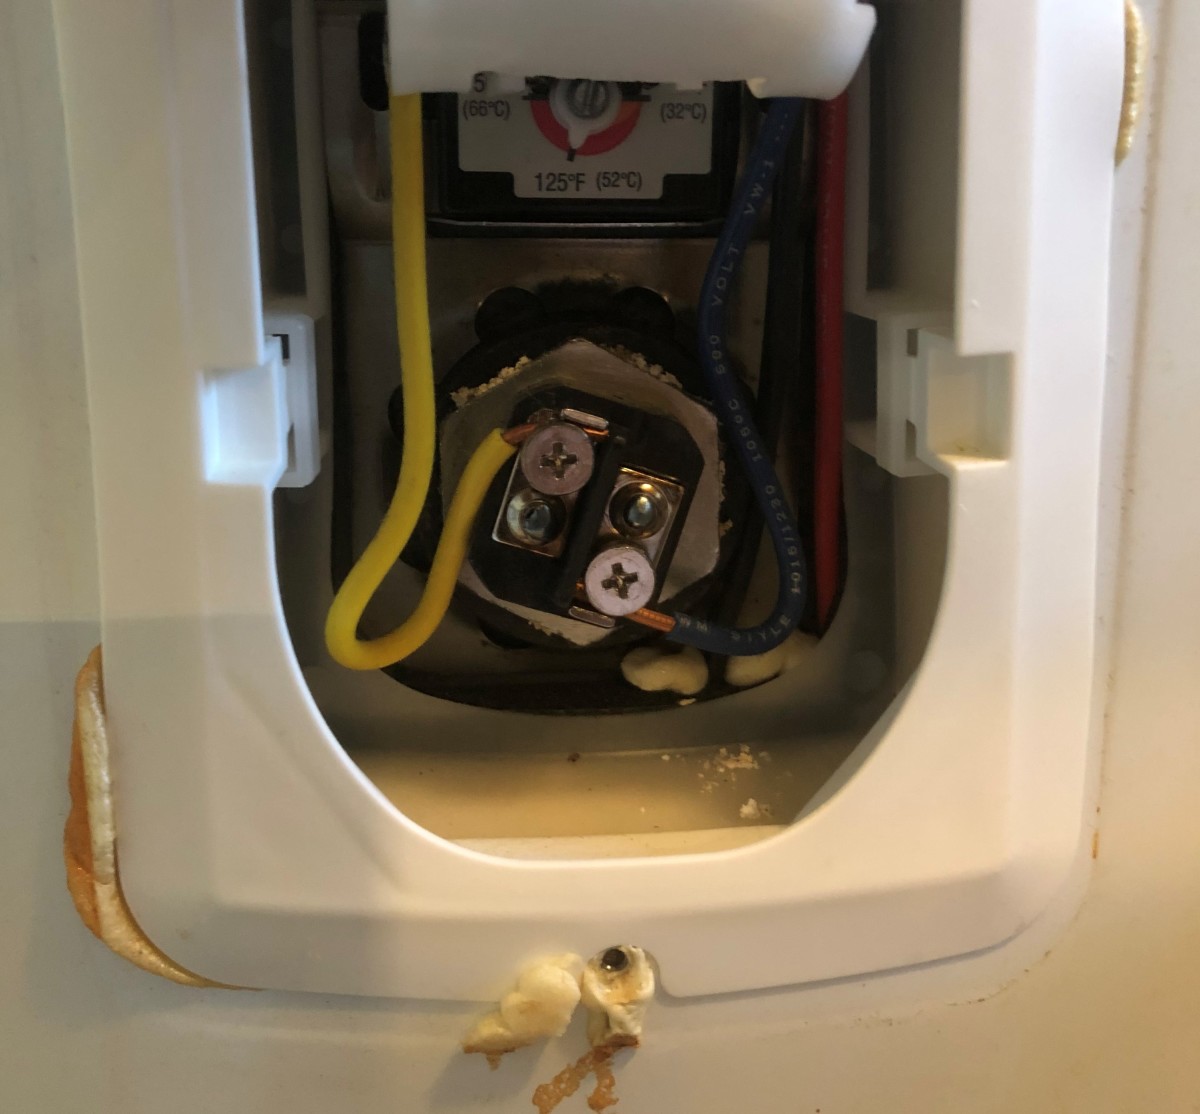 This water heater element connects to an upper thermostat.